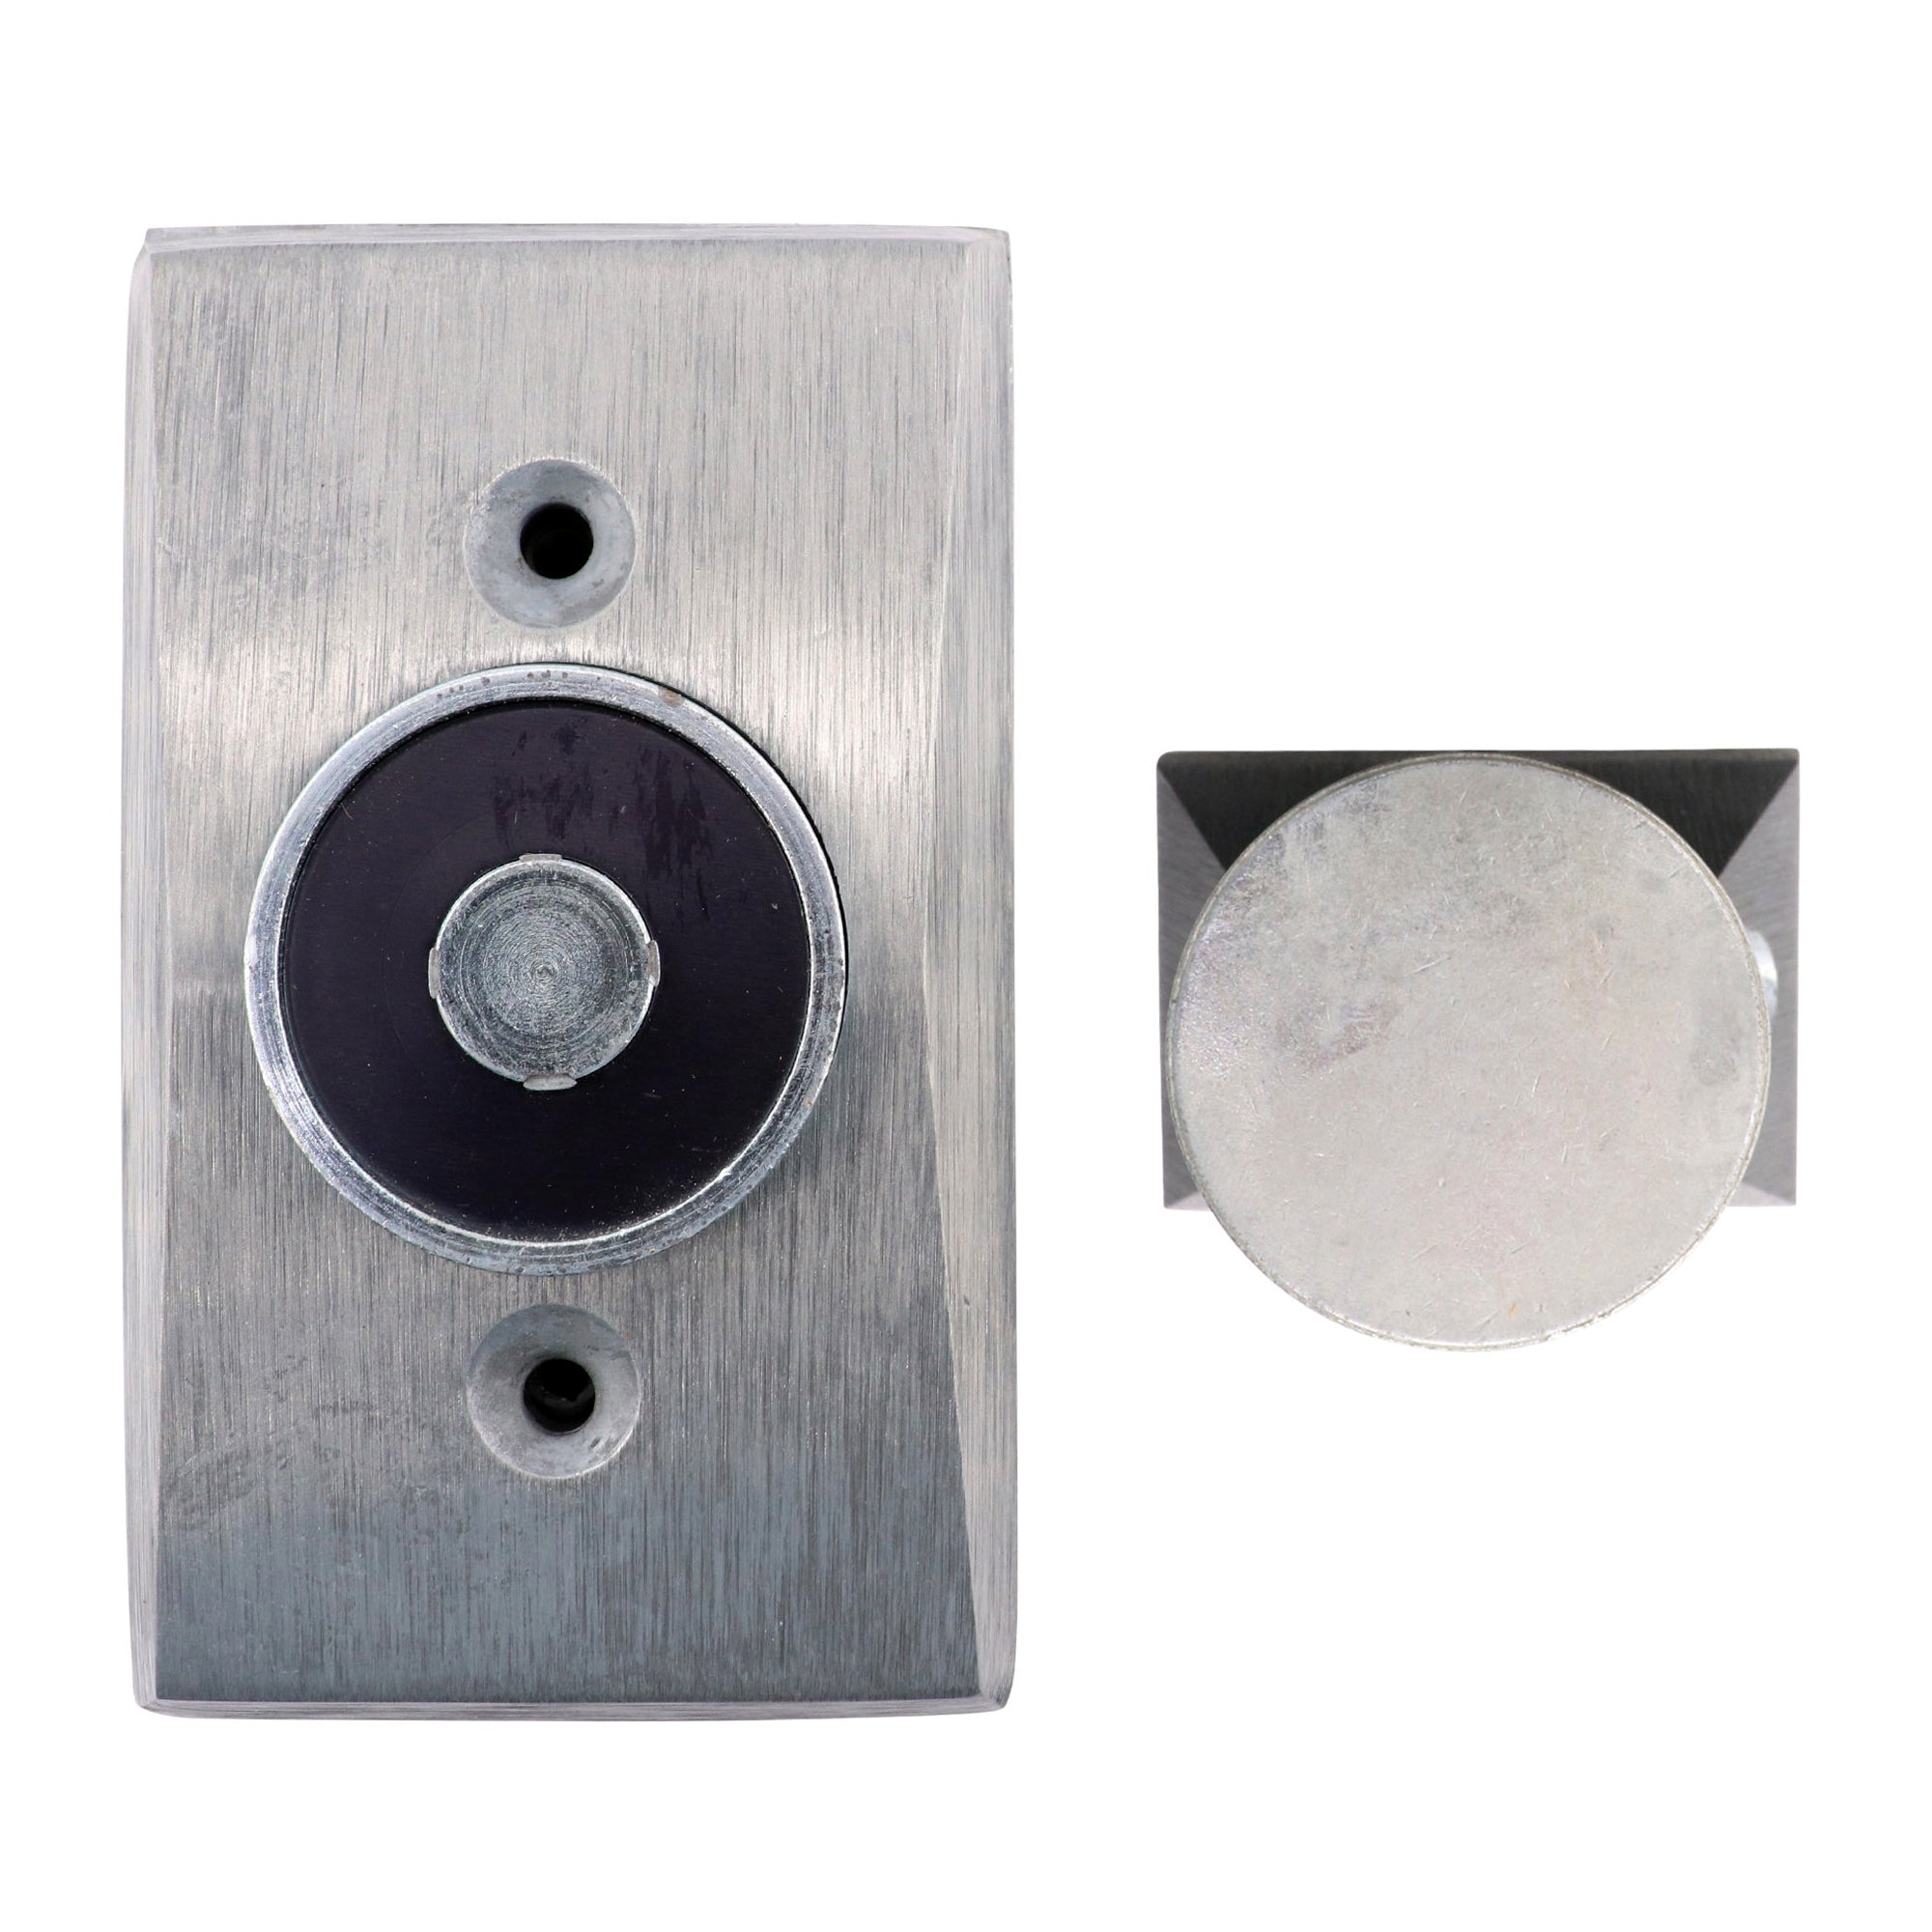 AIP ALARM INDUSTRY PRODUCTS, AIP AI1504-N5 ELECTROMAGNETIC DOOR HOLDER, SURFACE WALL MOUNT, 0.2A, 120V